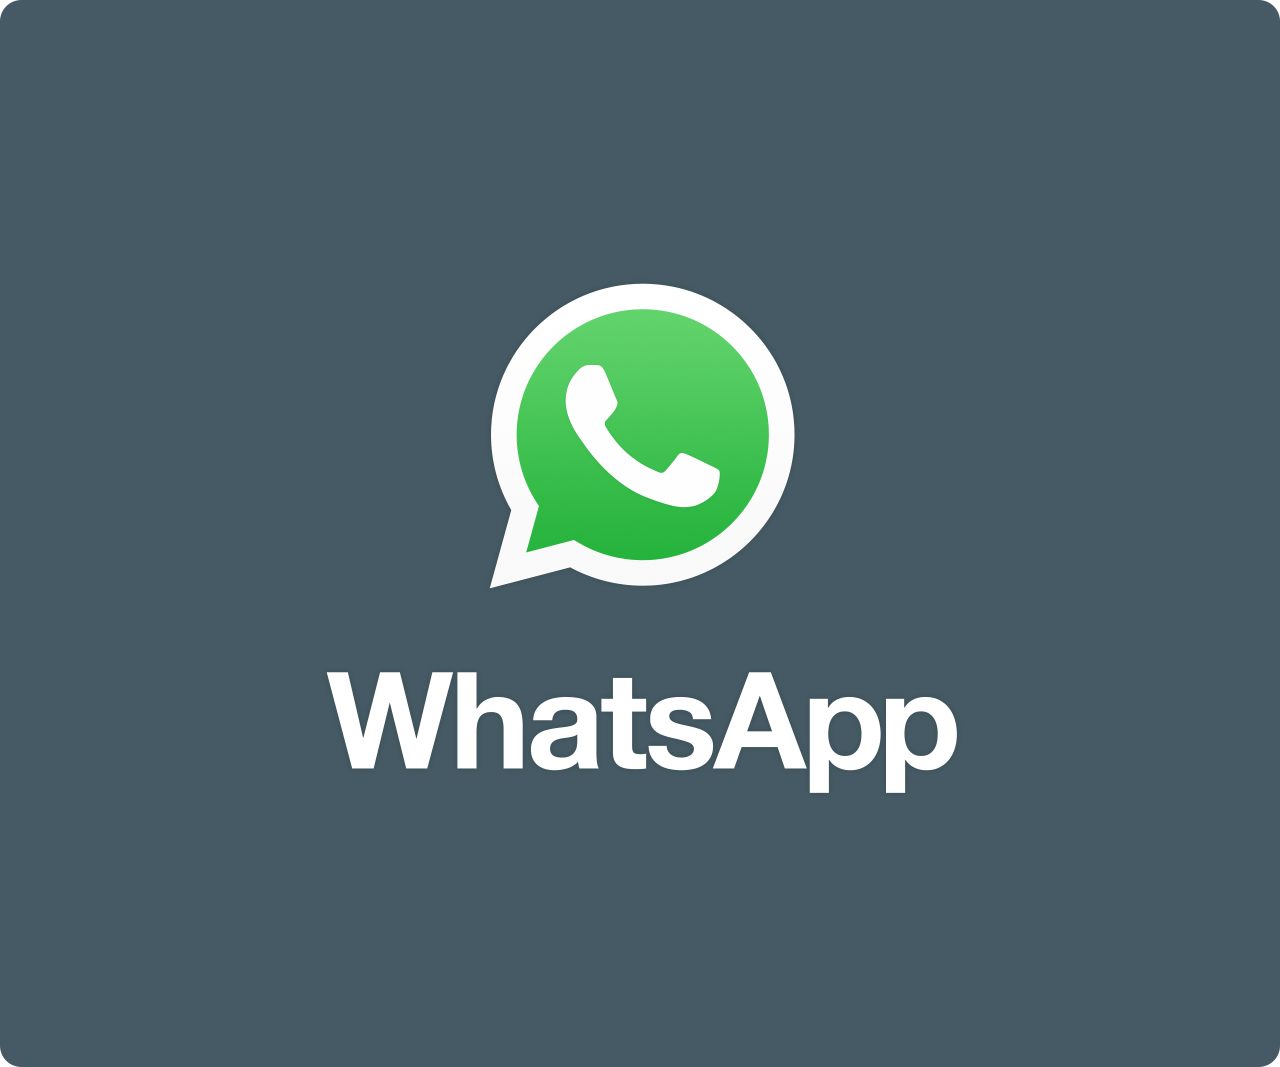 How to get WhatsApp numbers to chat? 3